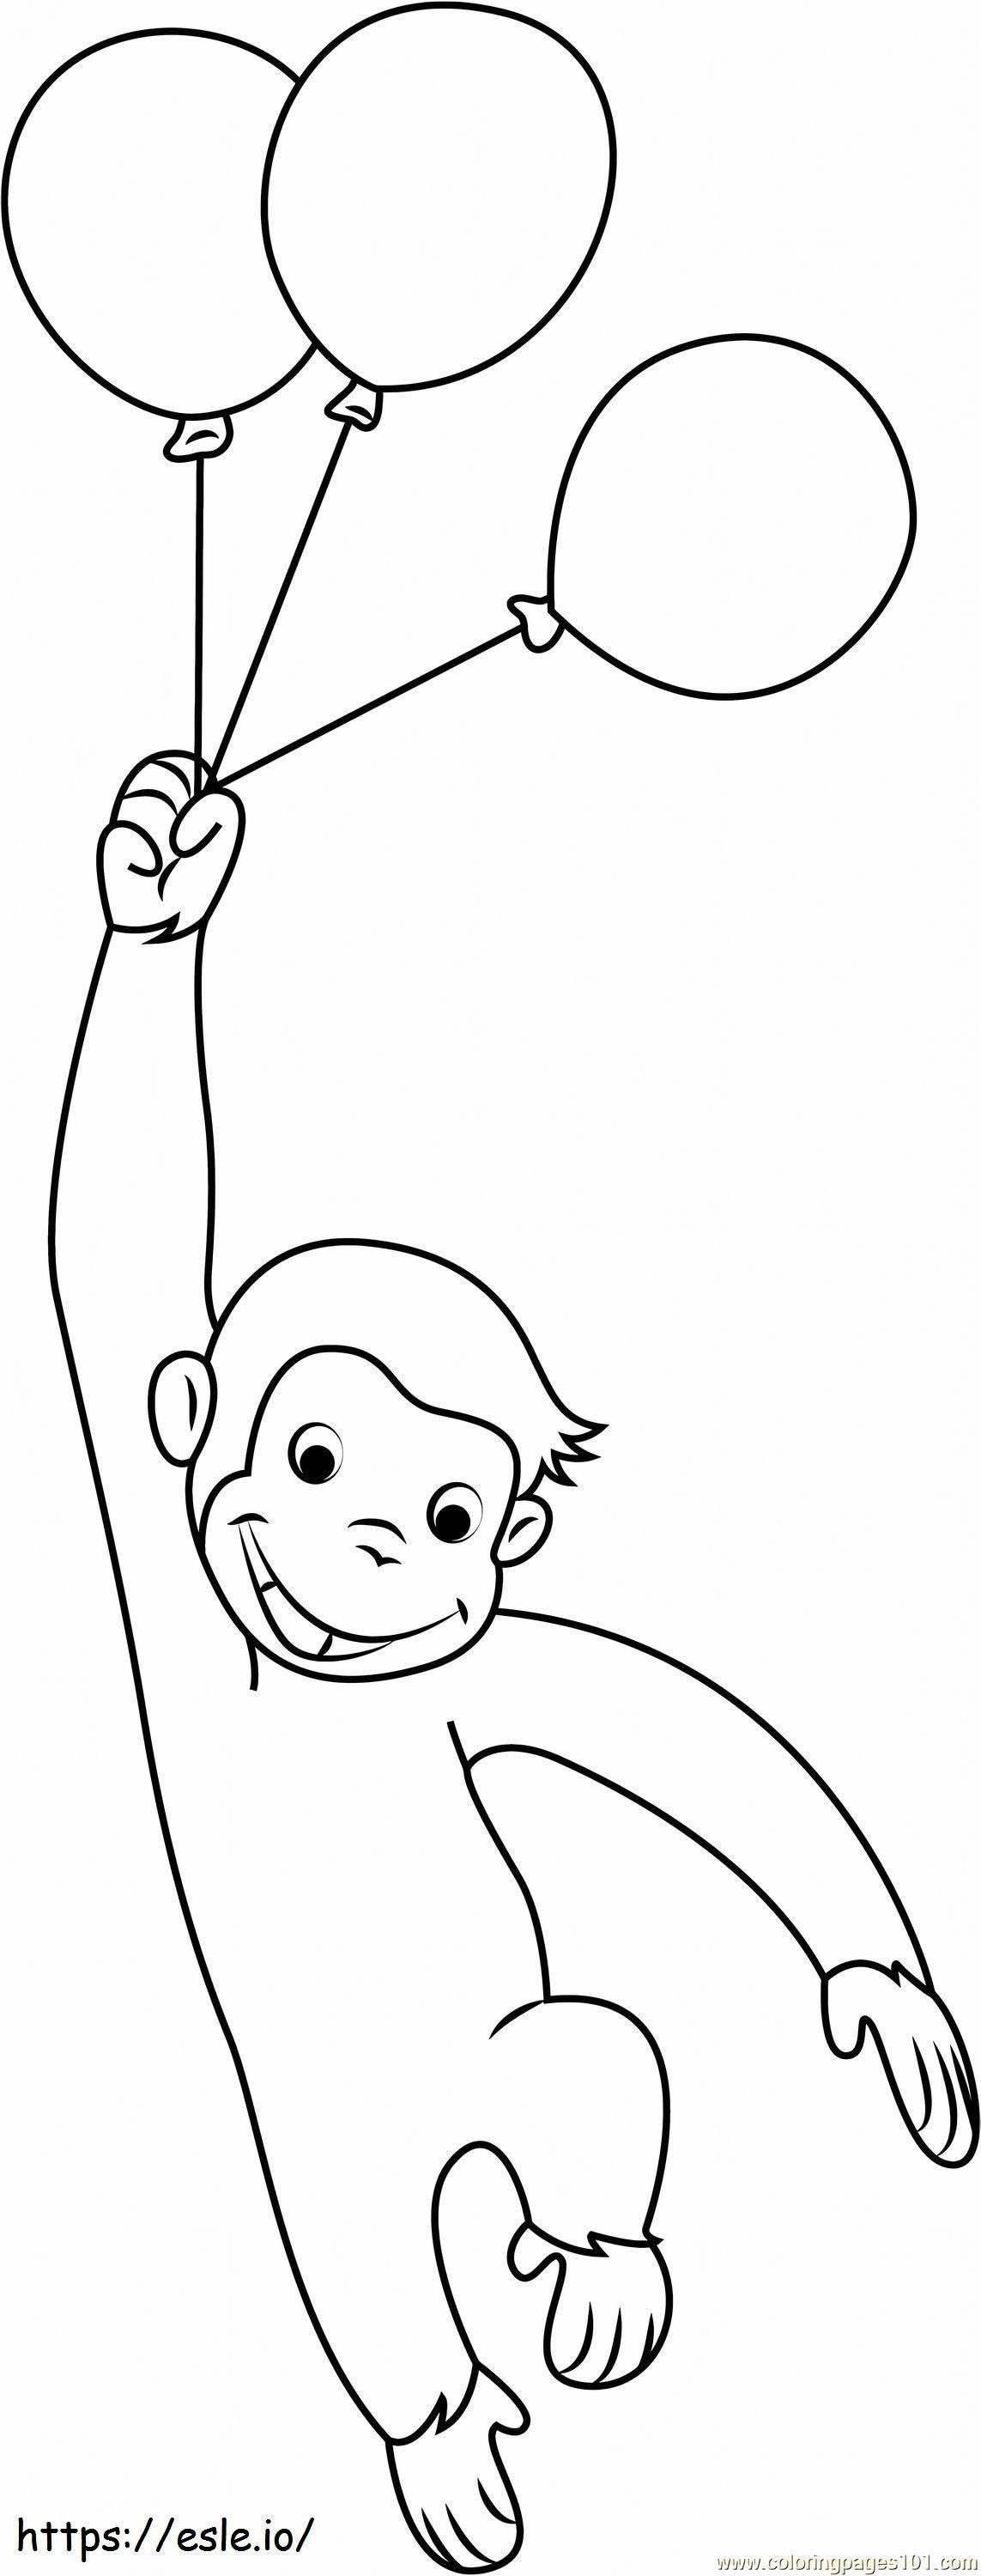 1530064267 54 coloring page